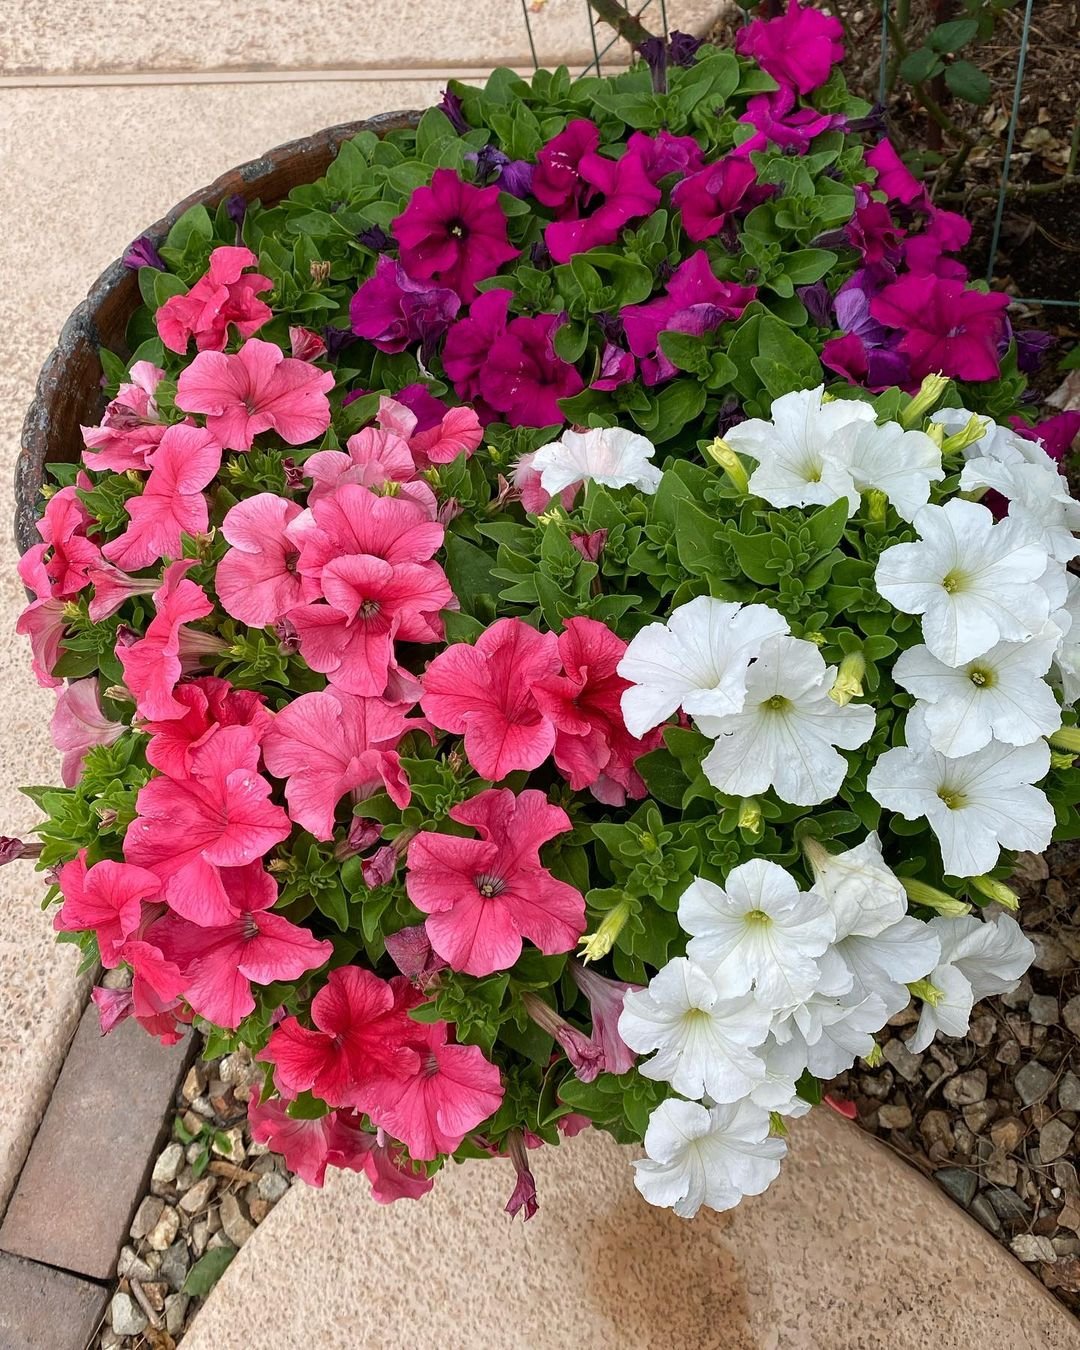 Vibrant Petunias in shades of pink, white, and purple.